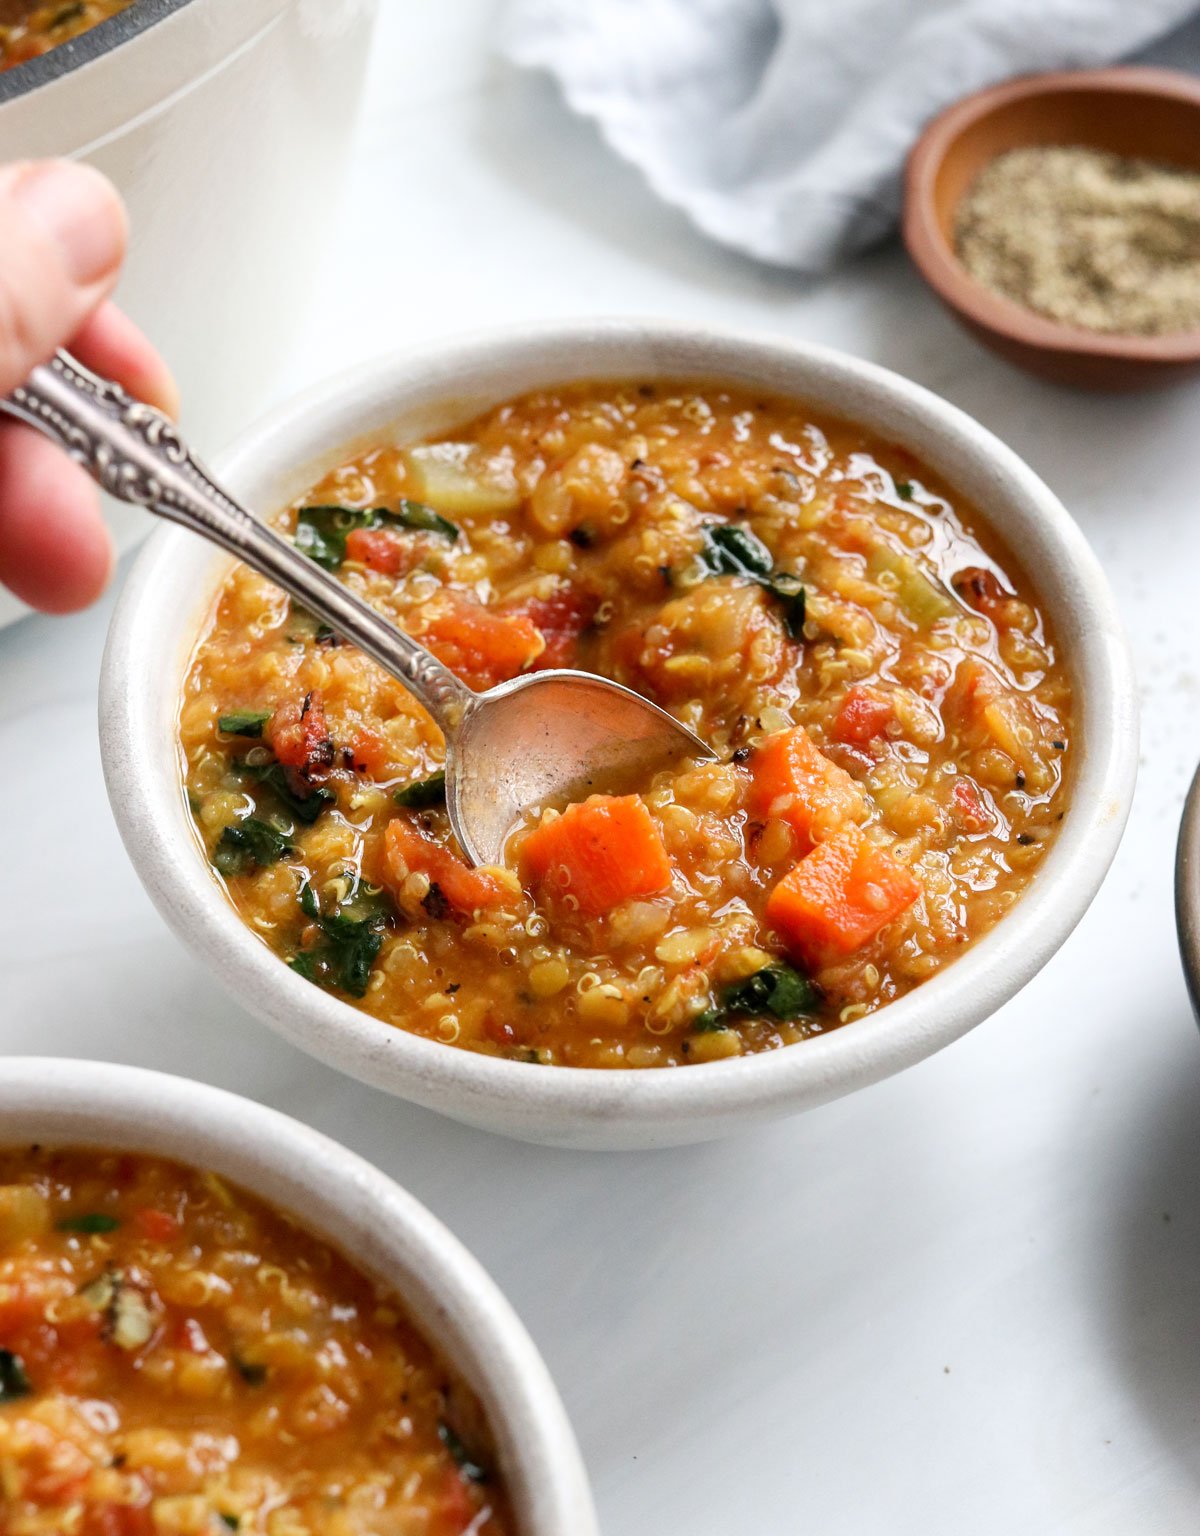 A spoon lifting up some quinoa soup from the bowl.